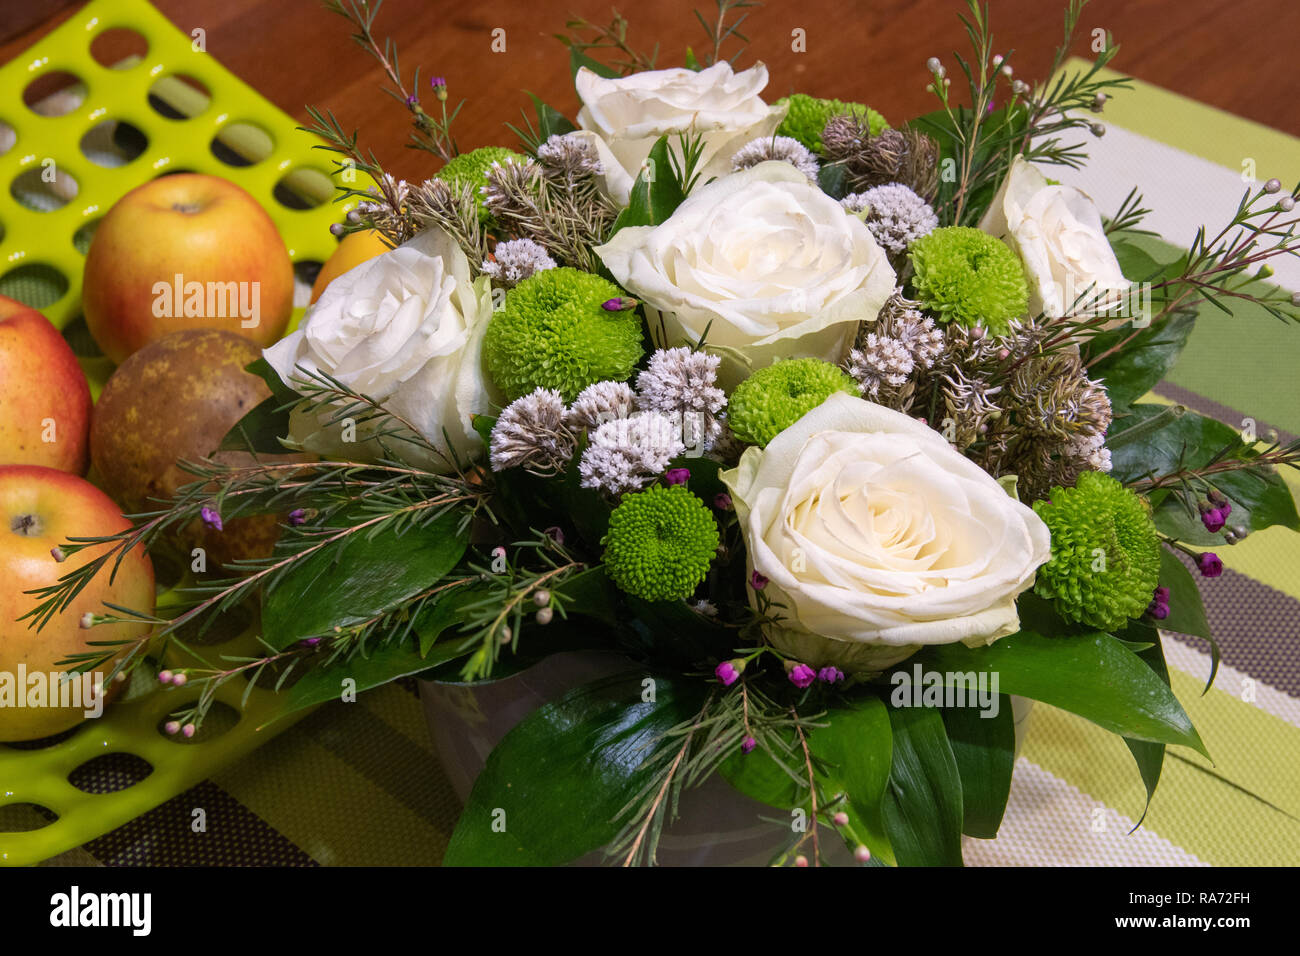 Beautiful bouquet of flowers with white ranunculus buttercup, green carnation and small purple and white flowers on wooden table. Light green hole dotted plate with fruits apple and pear Stock Photo